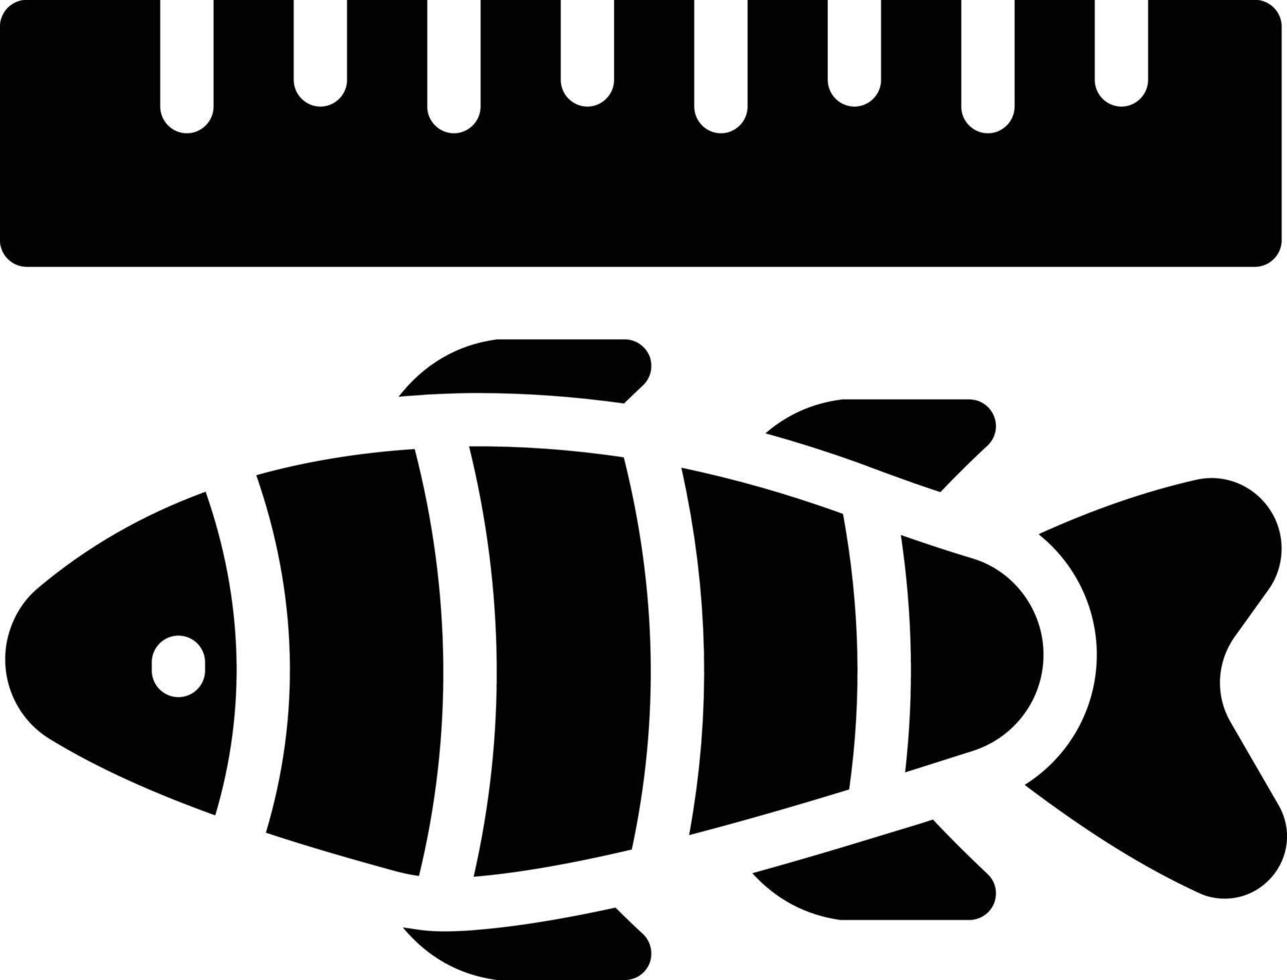 fish length vector illustration on a background.Premium quality symbols.vector icons for concept and graphic design.